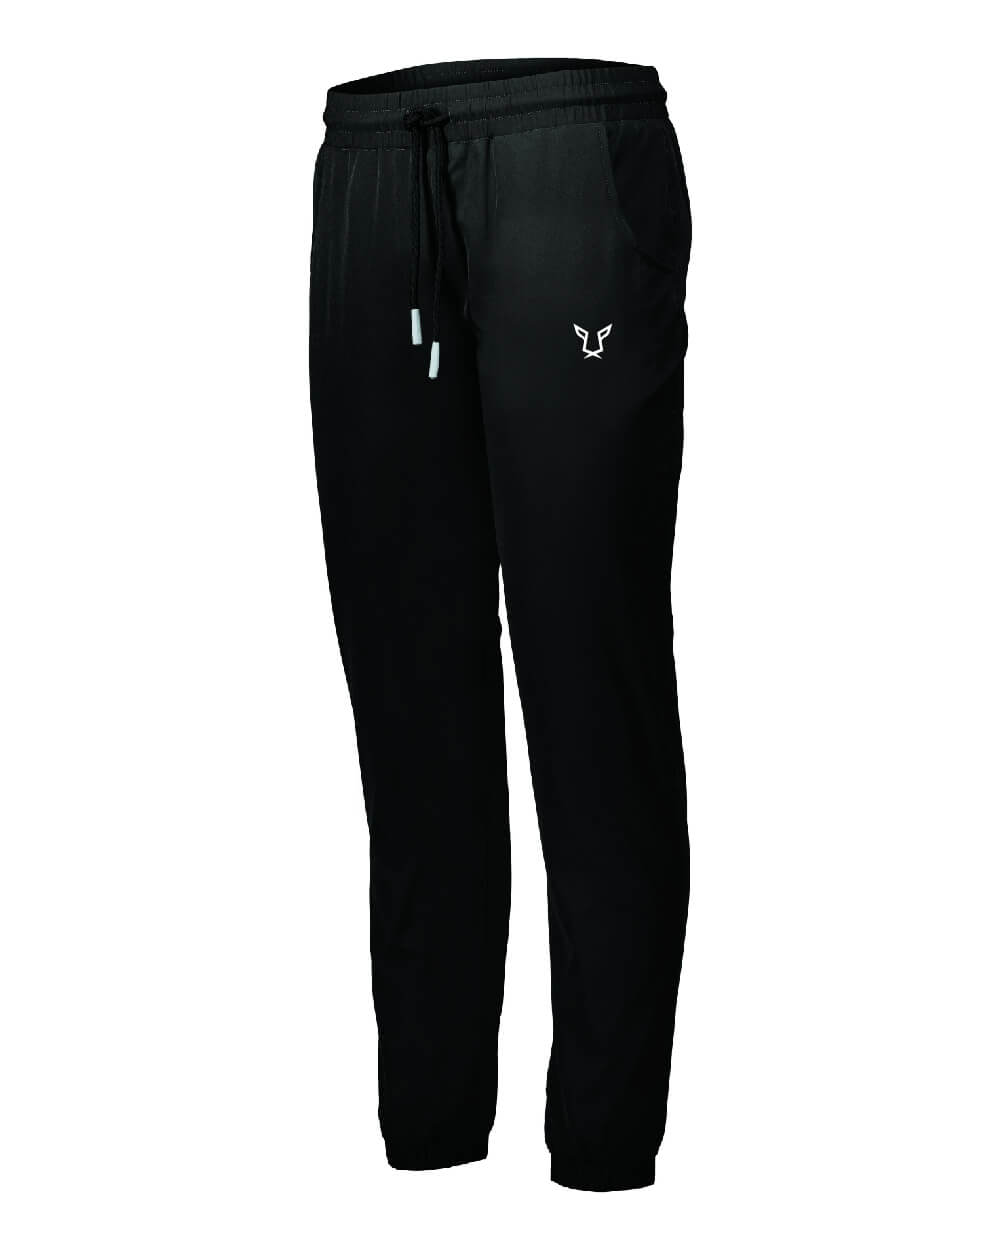 Women's Black Evolution Performance Joggers by Odisi Apparel